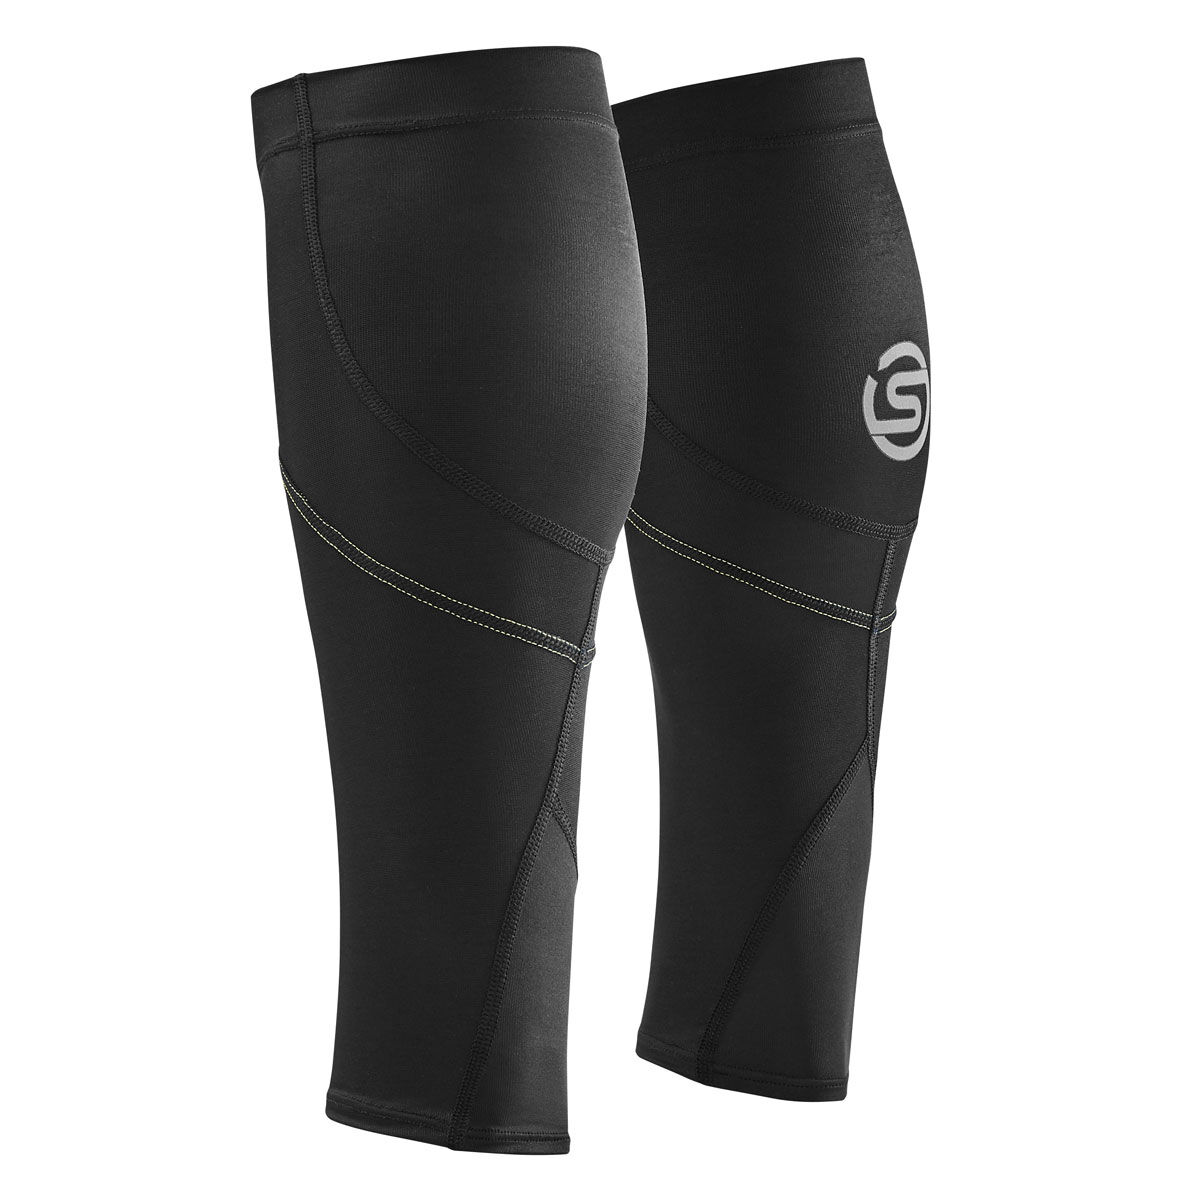 Activewear Review: Distance Black Reflective Compression Sleeves